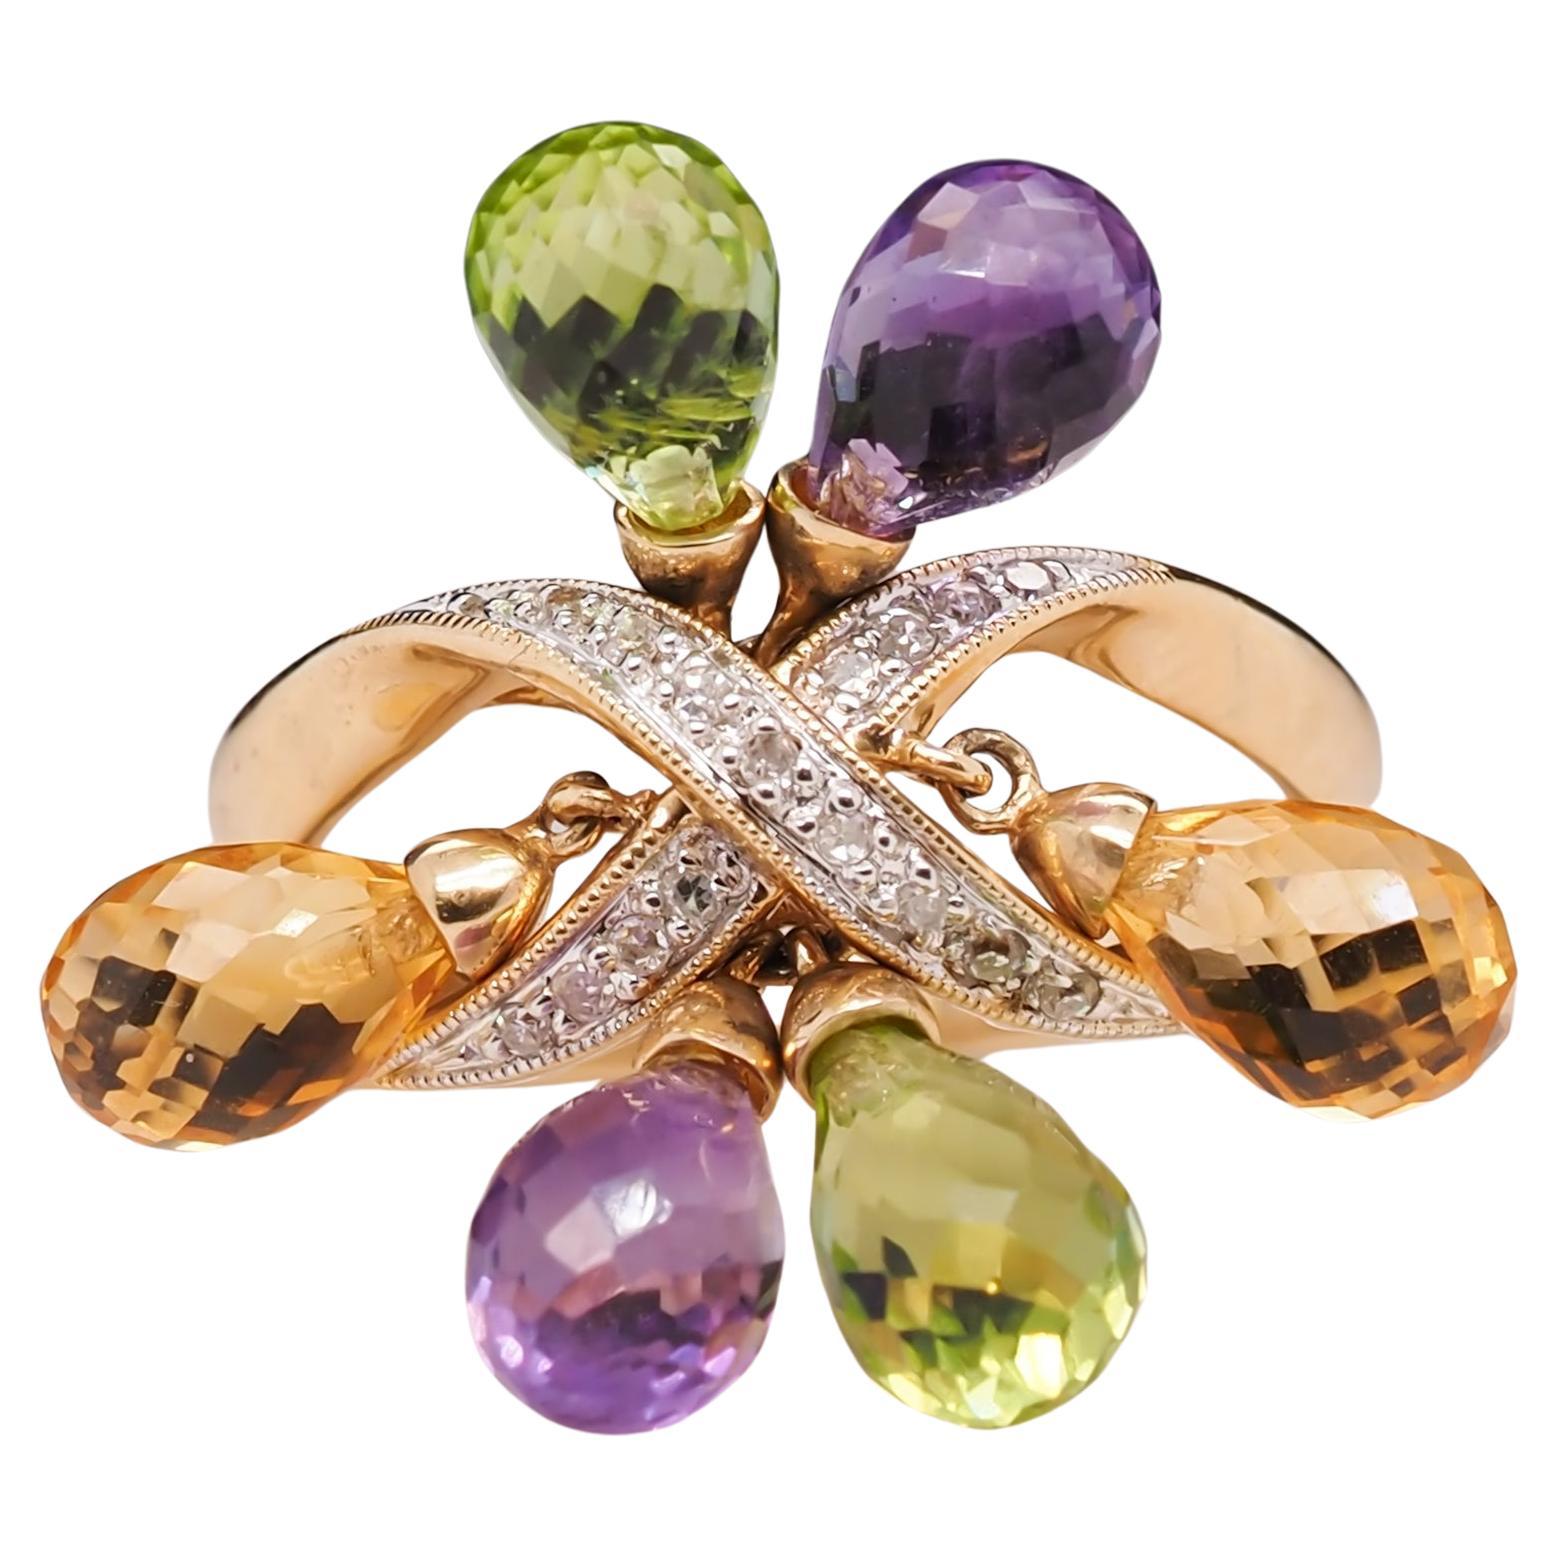 14 Karat Yellow Gold Diamond and Dangling Citrine, Amethyst and Peridot Ring For Sale